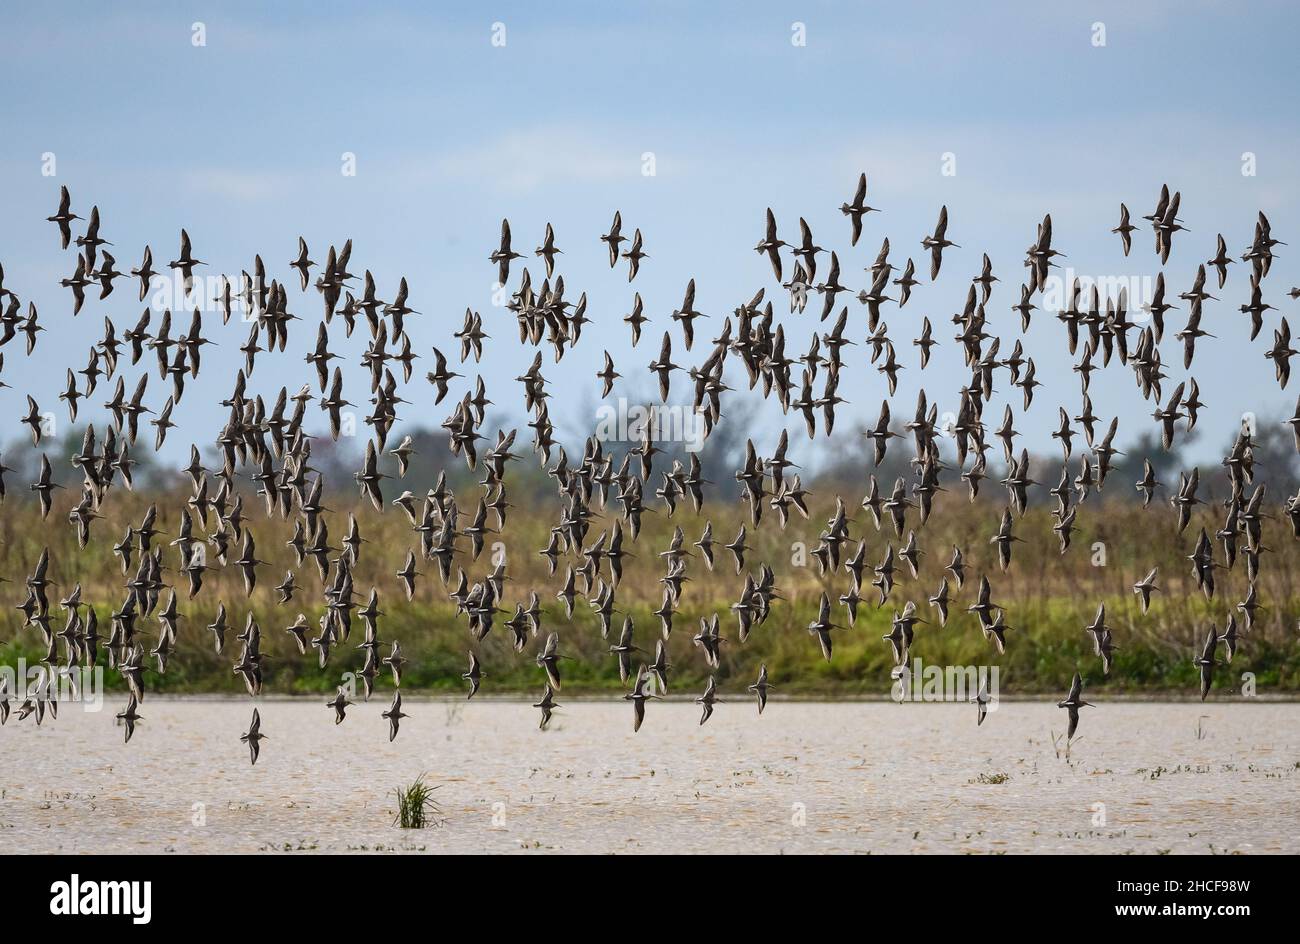 Flock of Long-billed Dowitchers (Limnodromus scolopaceus) flying over a lake. Houston, Texas, USA. Stock Photo